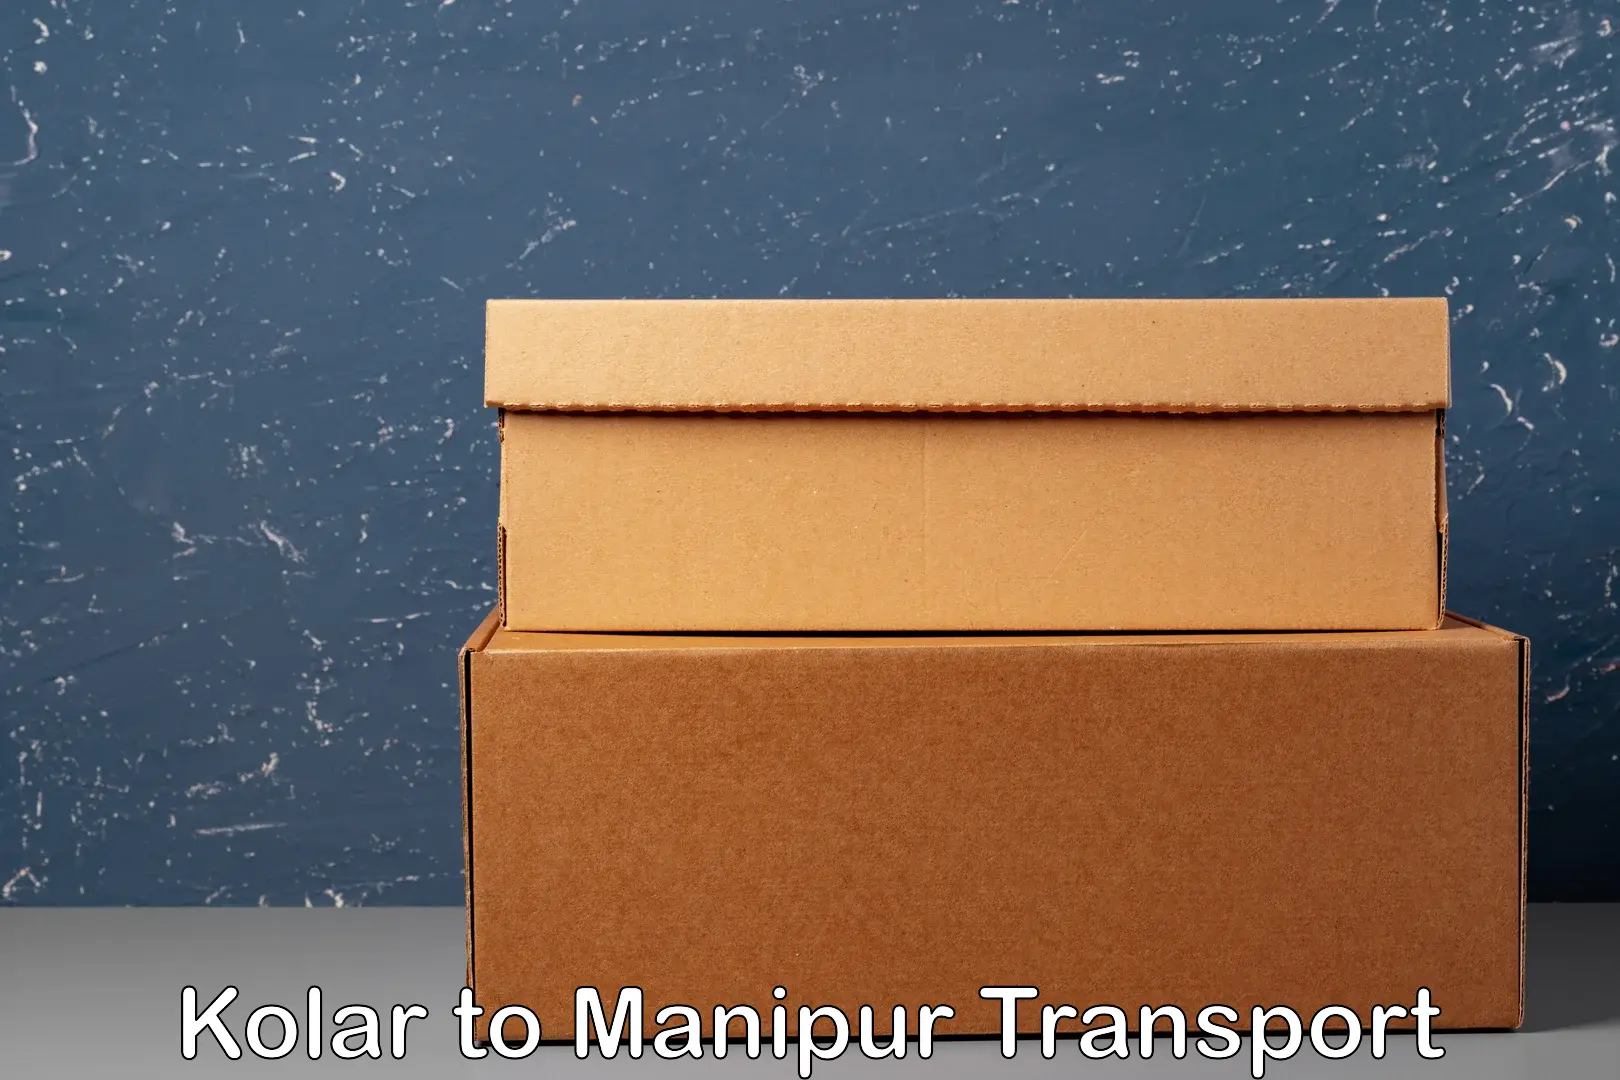 Delivery service Kolar to Manipur